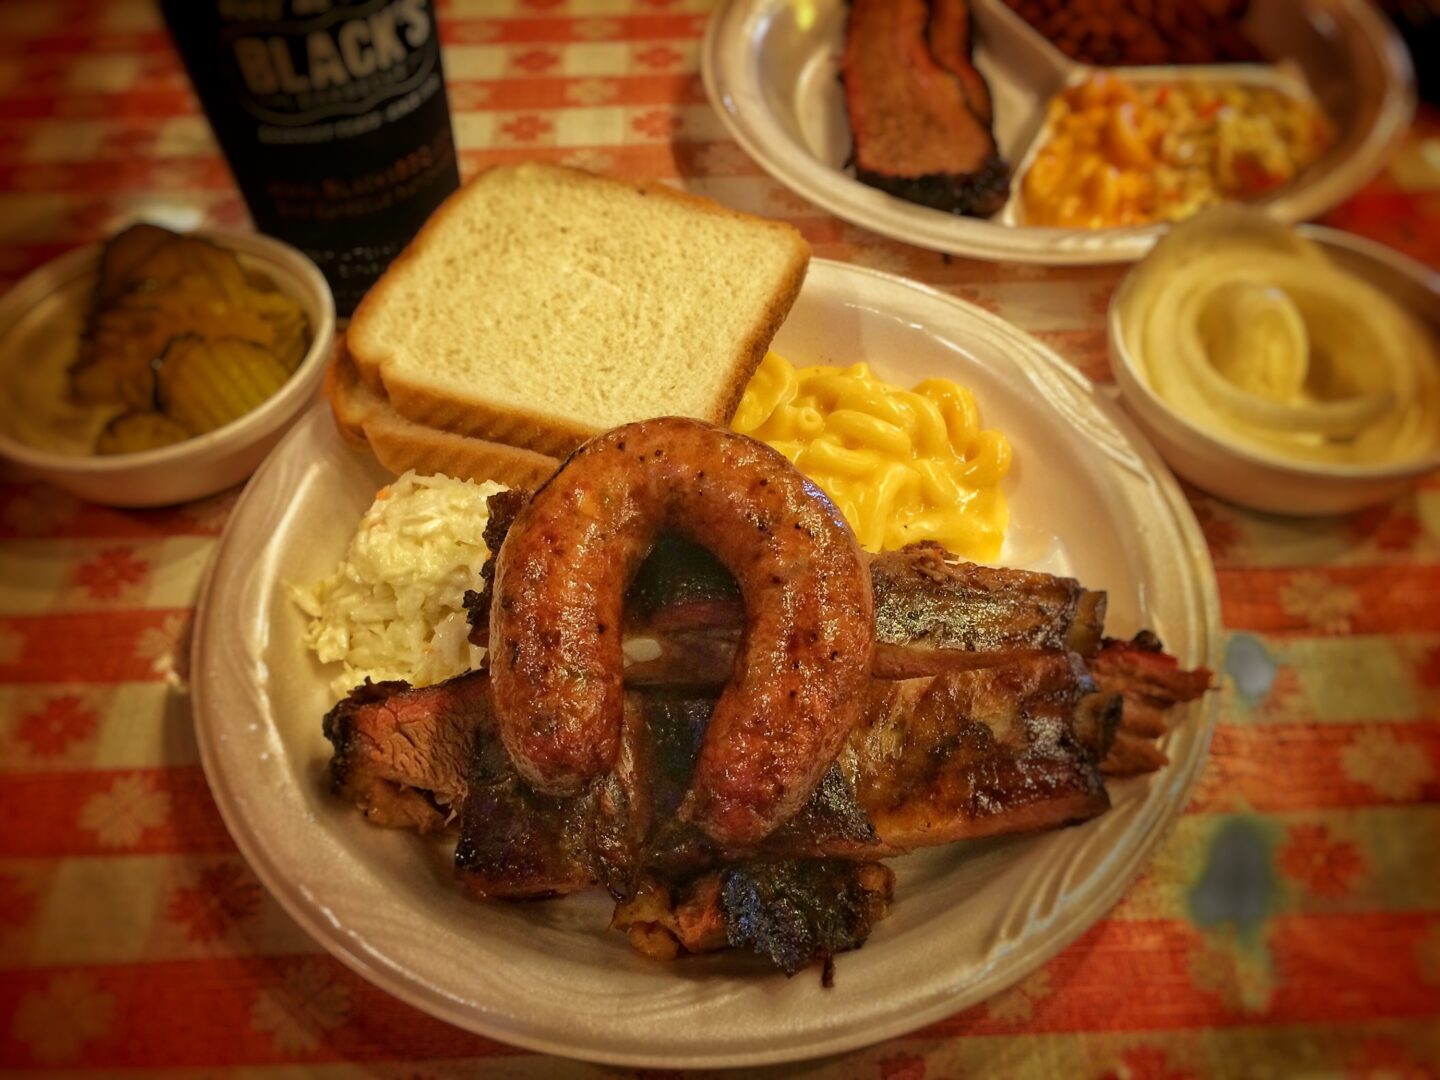 A plate of ribs, macaroni and cheese and a bottle of beer.